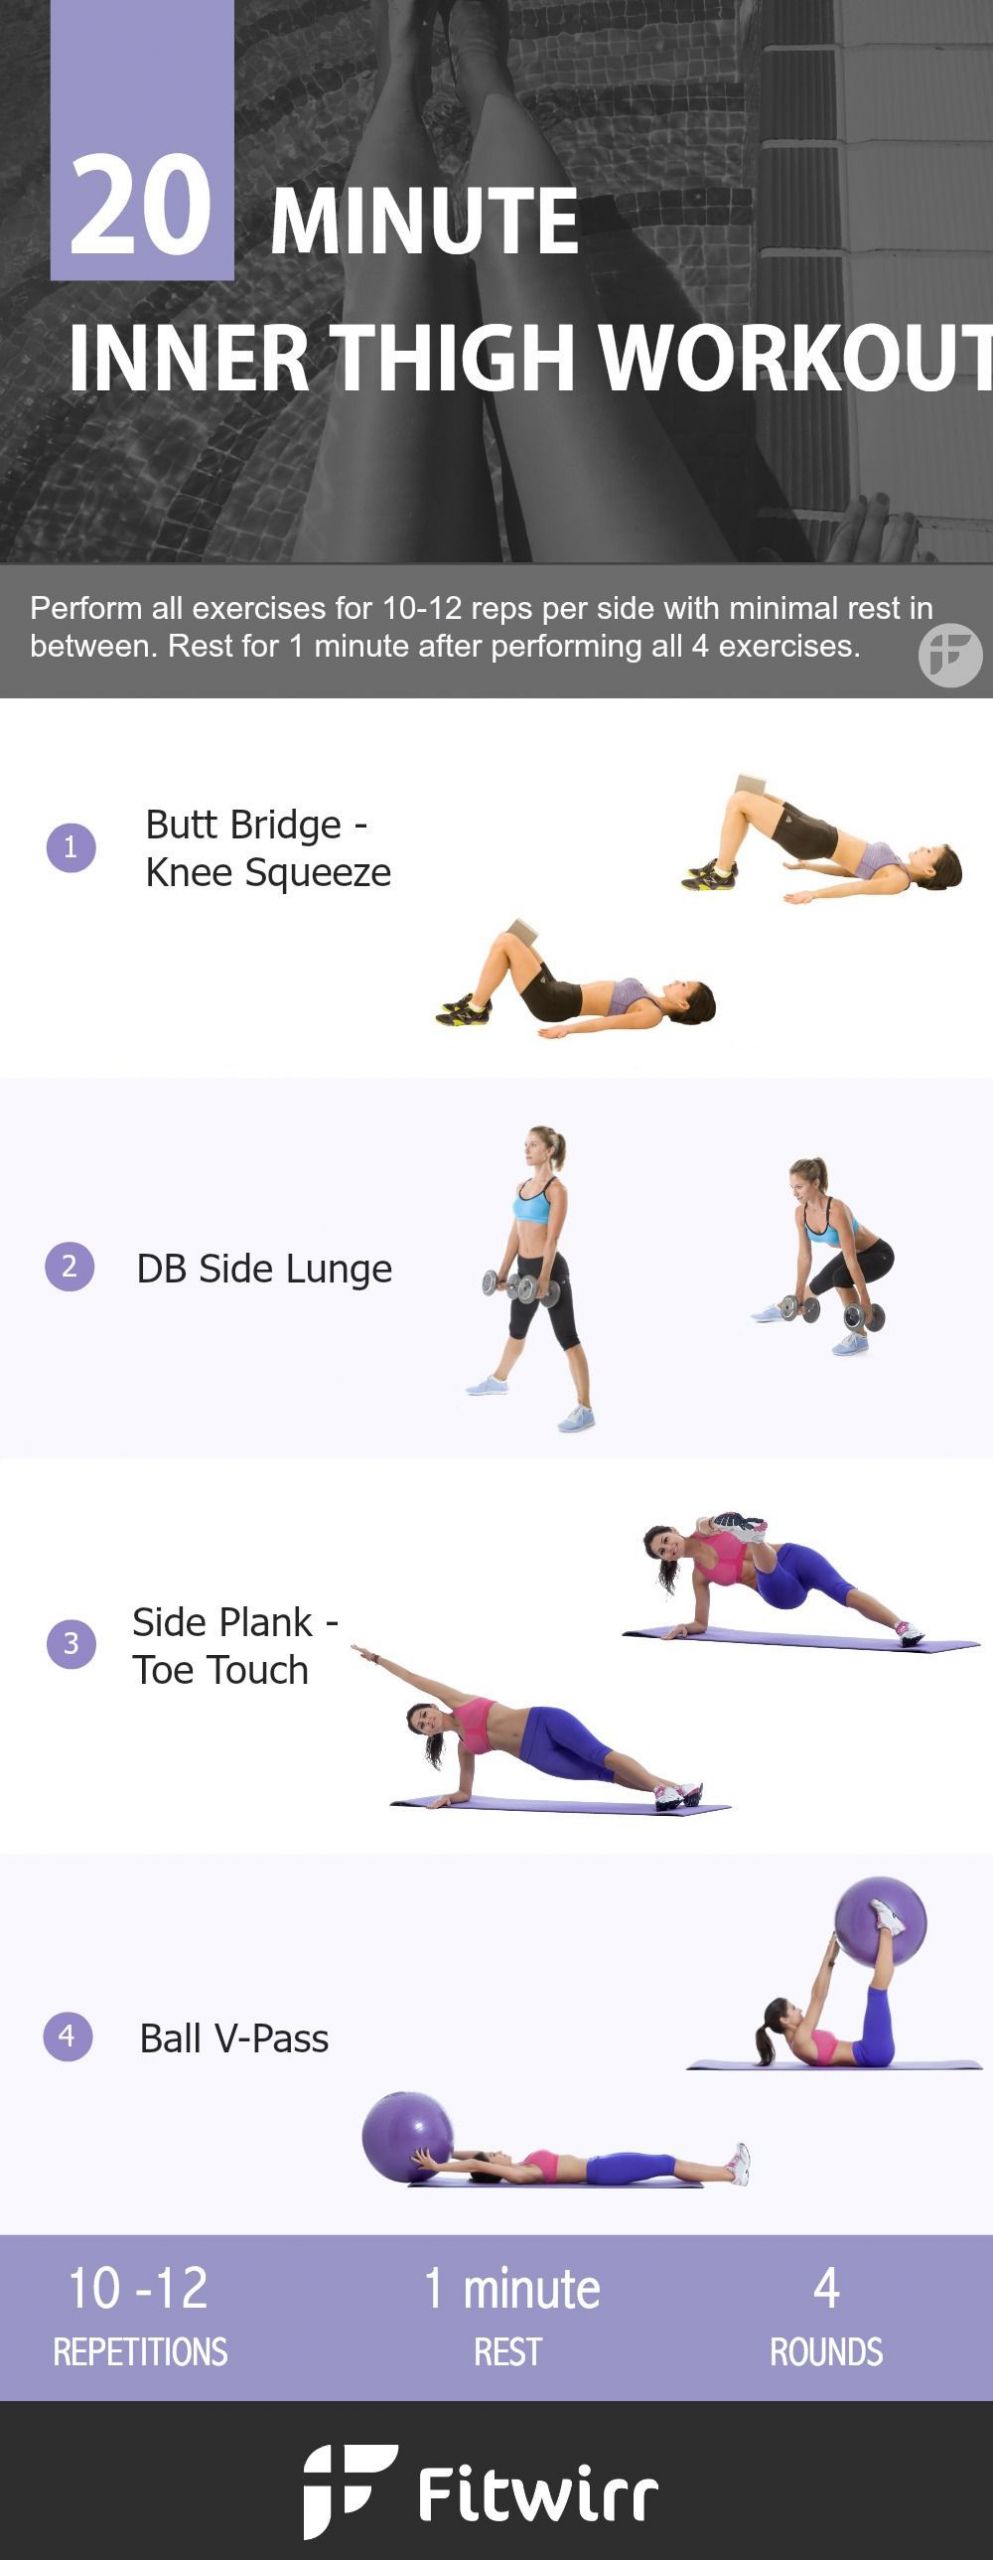 Inner Thigh Fat Burning Workout
 The Best 20 Minute Inner Thigh Workout to Lose the Leg Fat